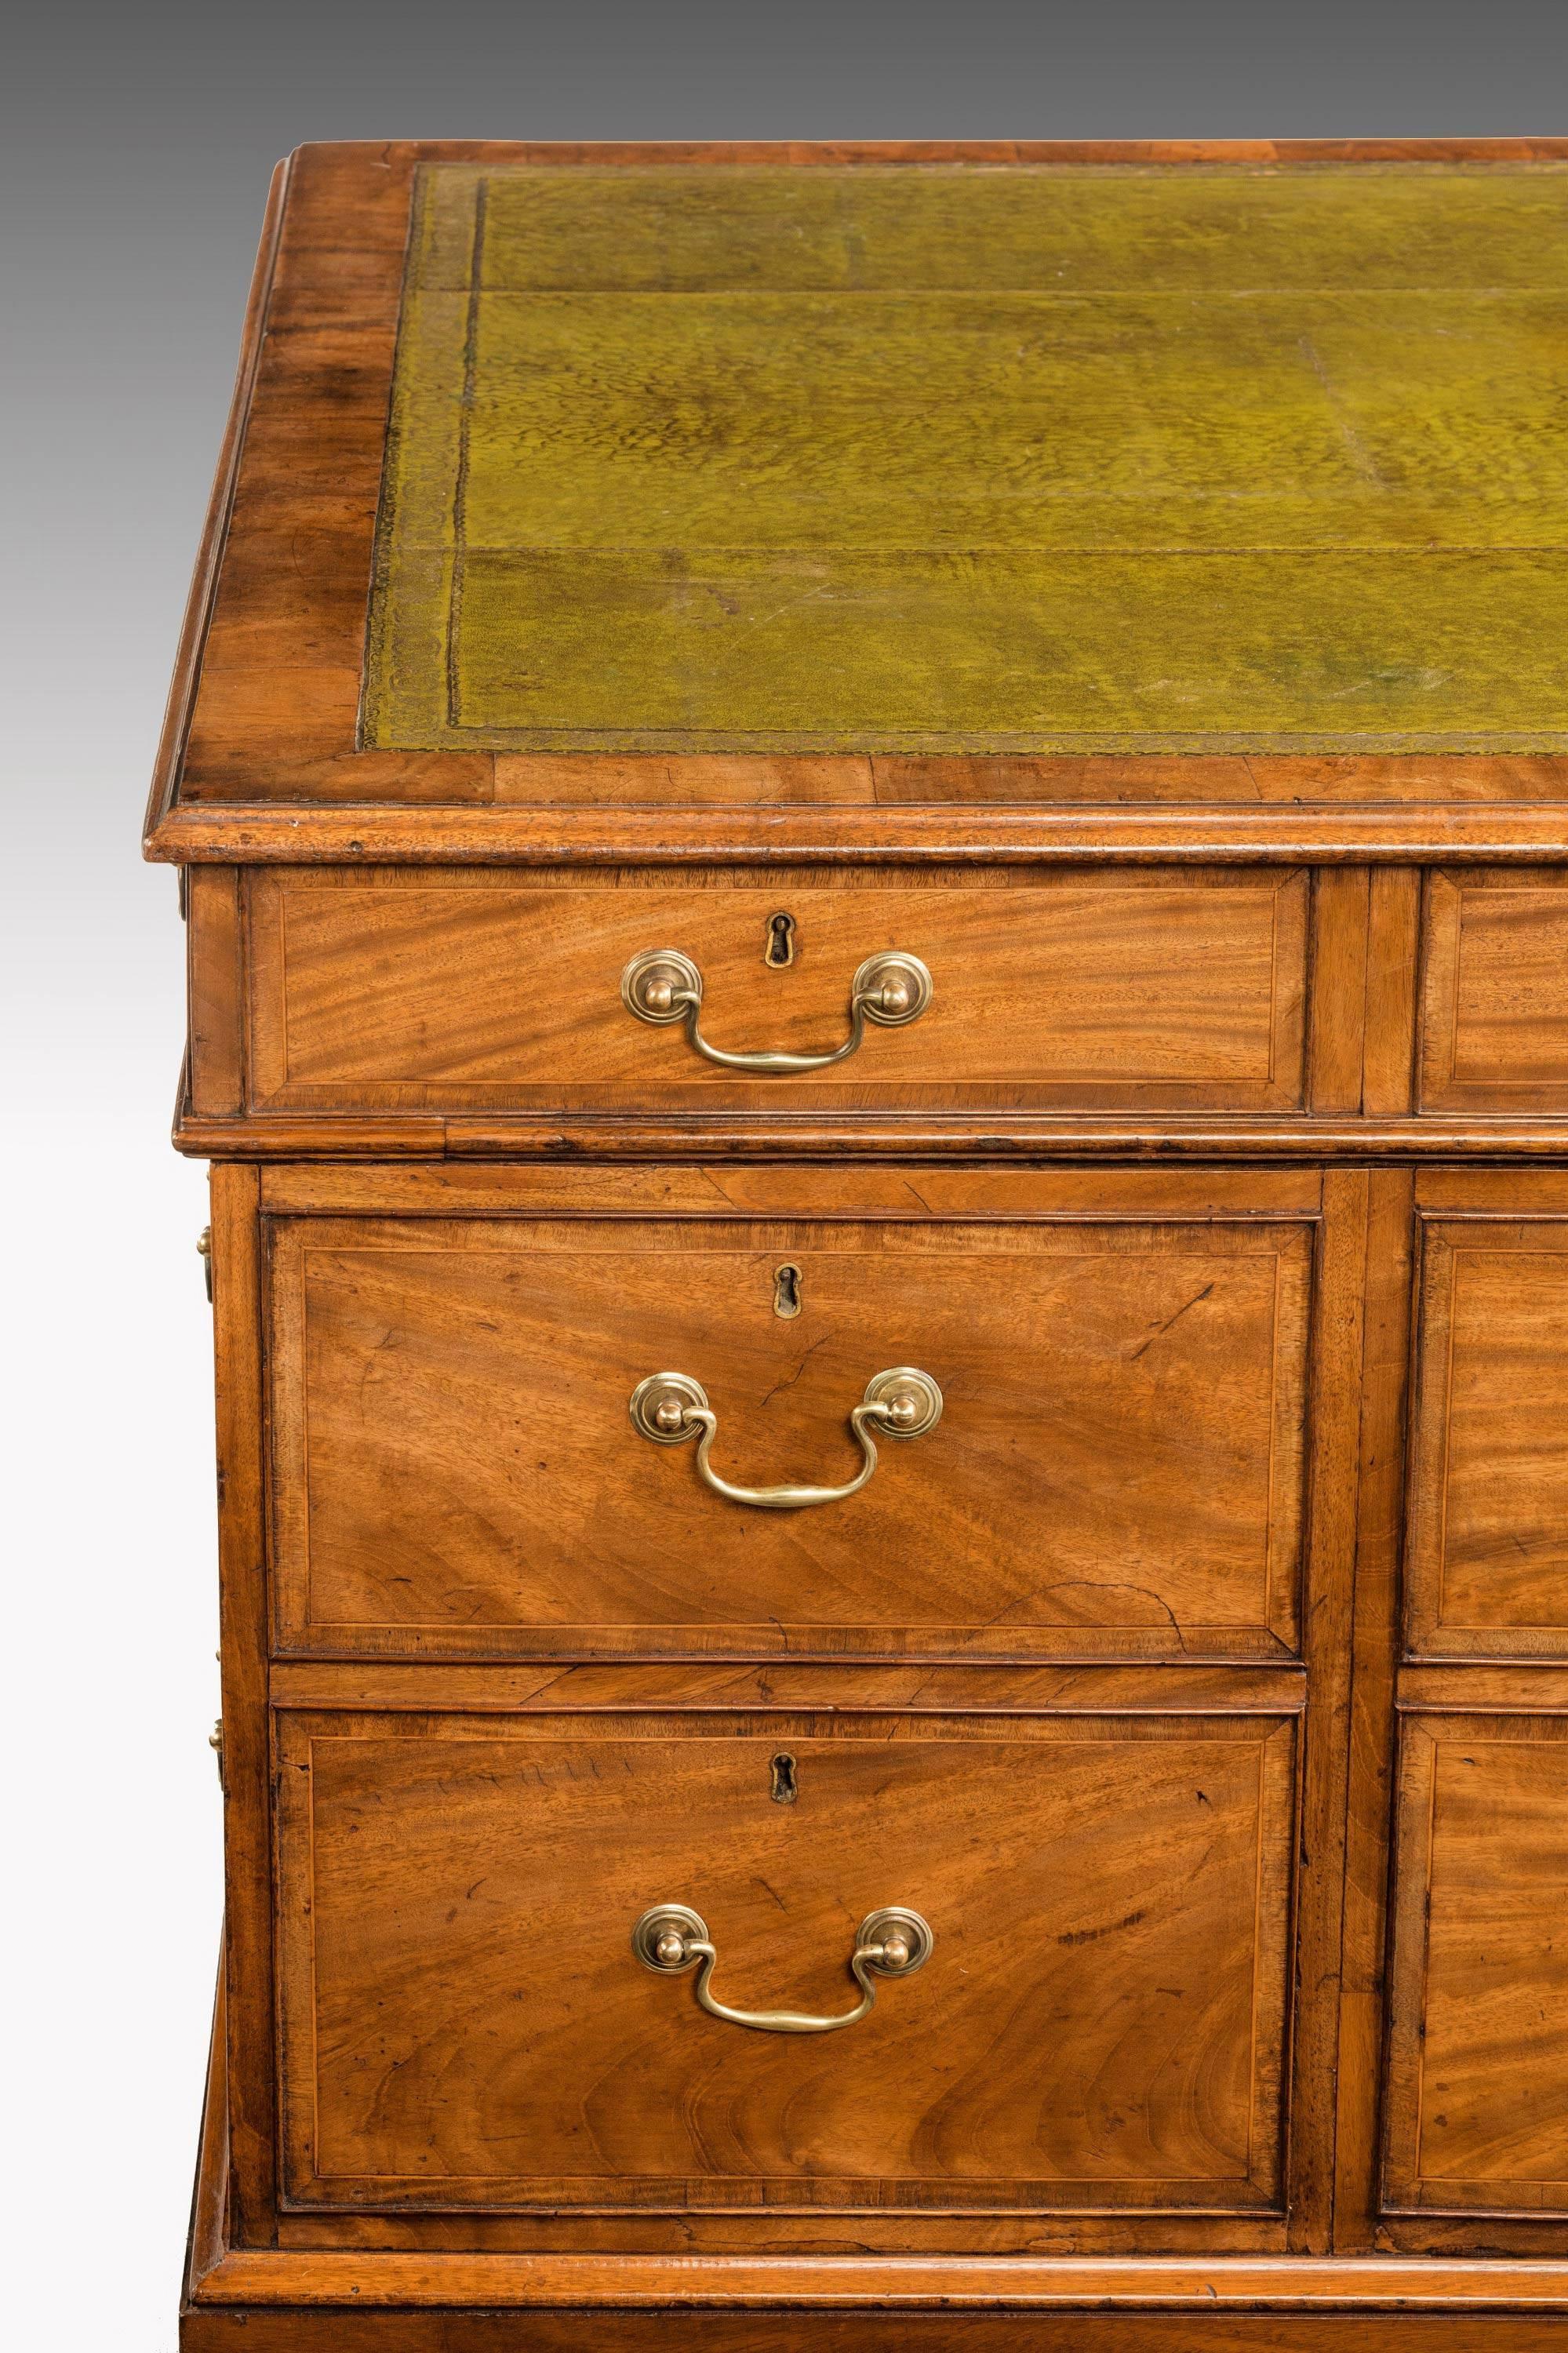 A very fine quality and restrained Chippendale period mahogany partners desk in three sections. The top with old, but replaced leather. Fine original swan neck handles. The whole of exceptional cabinet work and wonderful condition.

